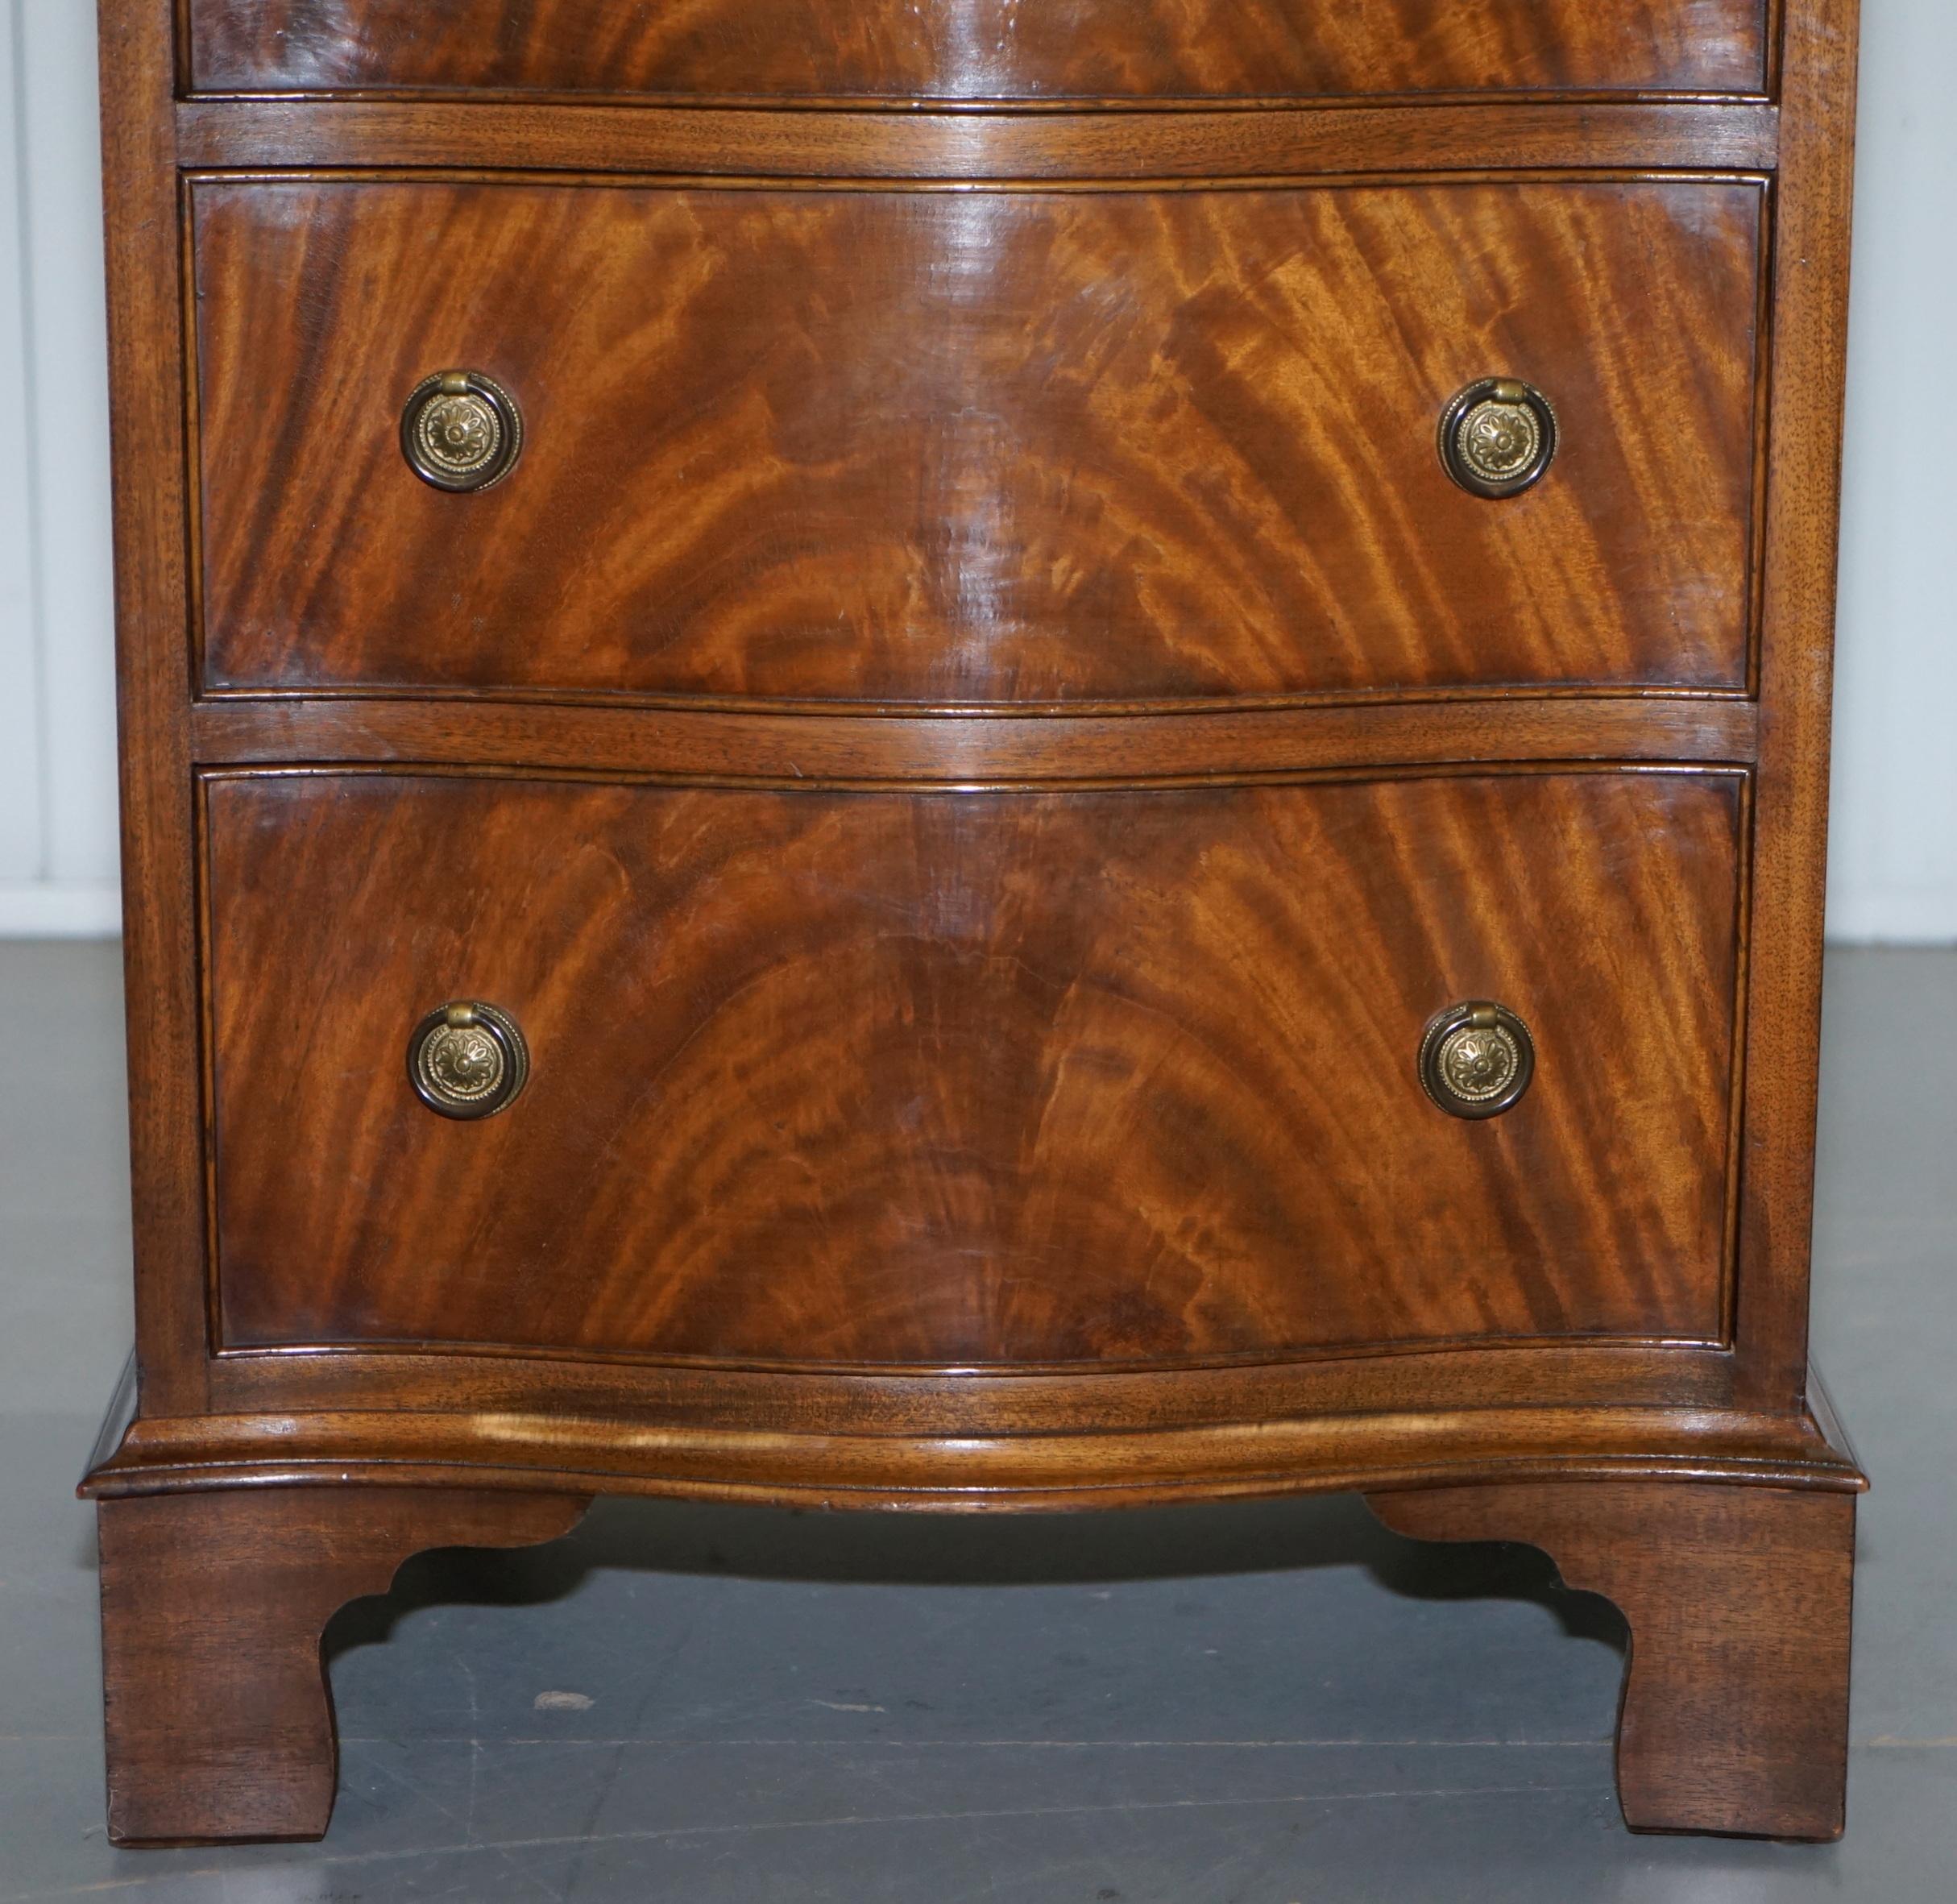 Hand-Crafted Nice Flamed Hardwood Bevan Funnell Serpentine Fronted Tall Boy Chest of Drawers